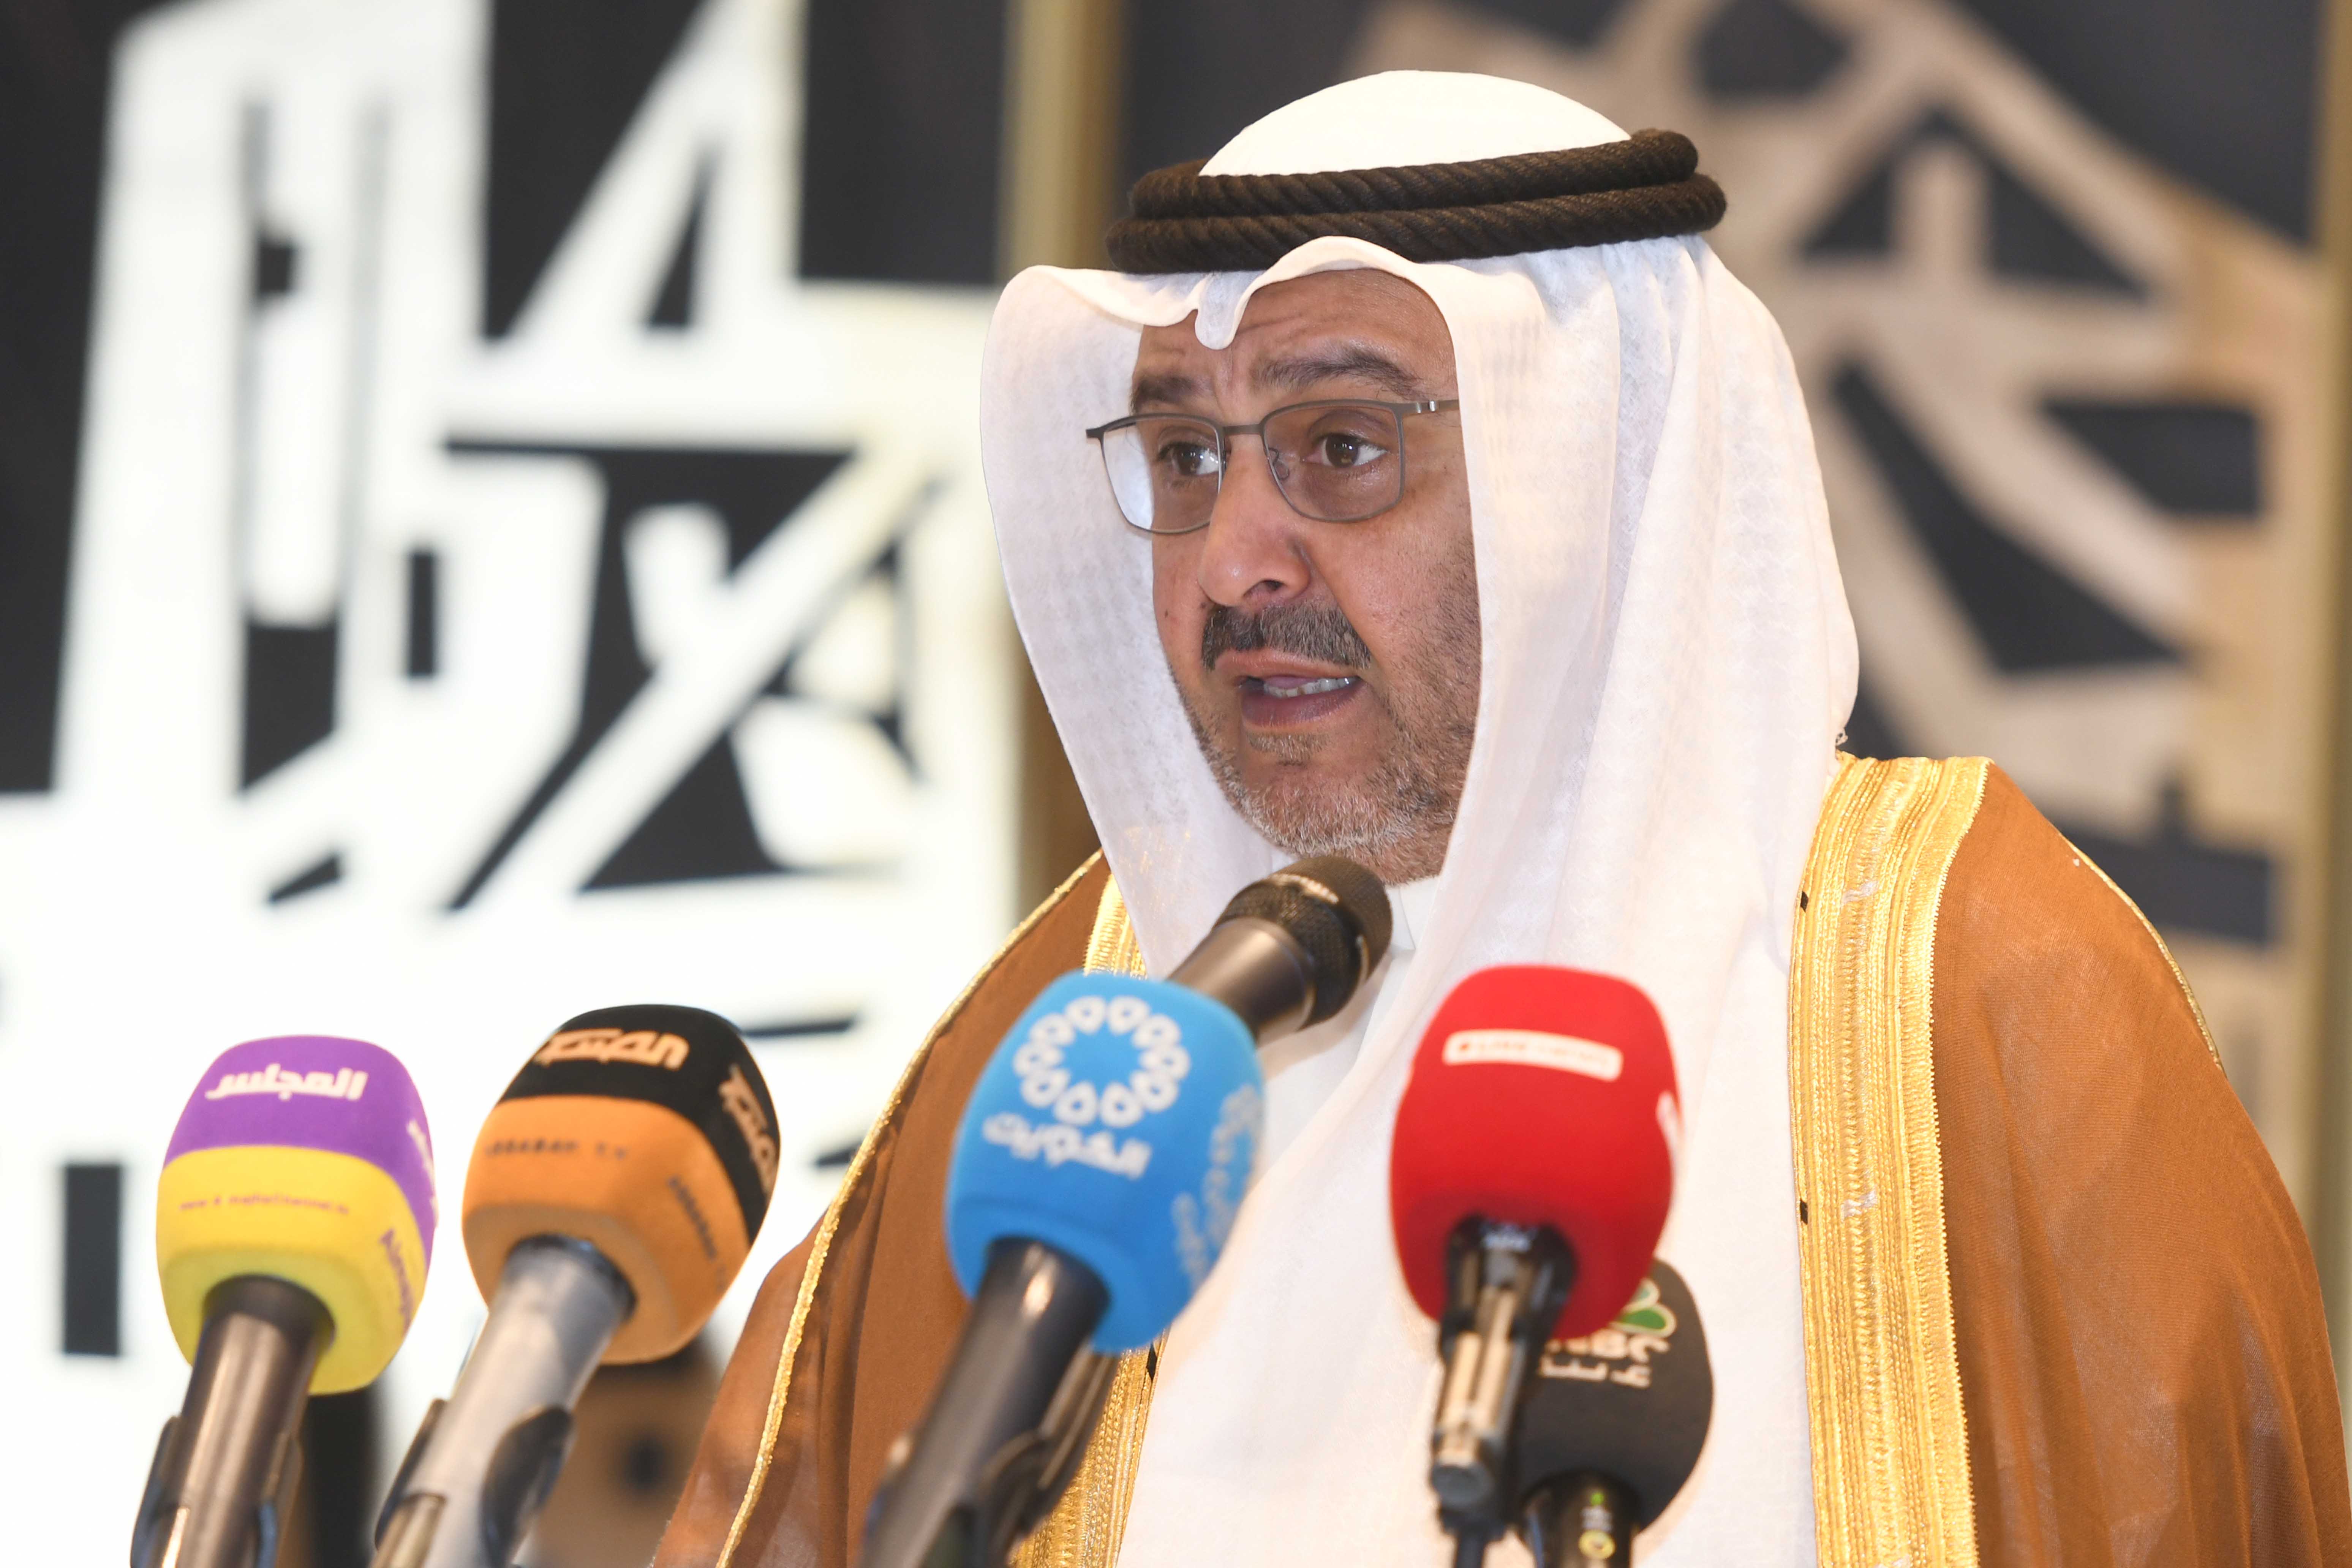 Minister of Commerce and Industry Fahad Al-Shuraian